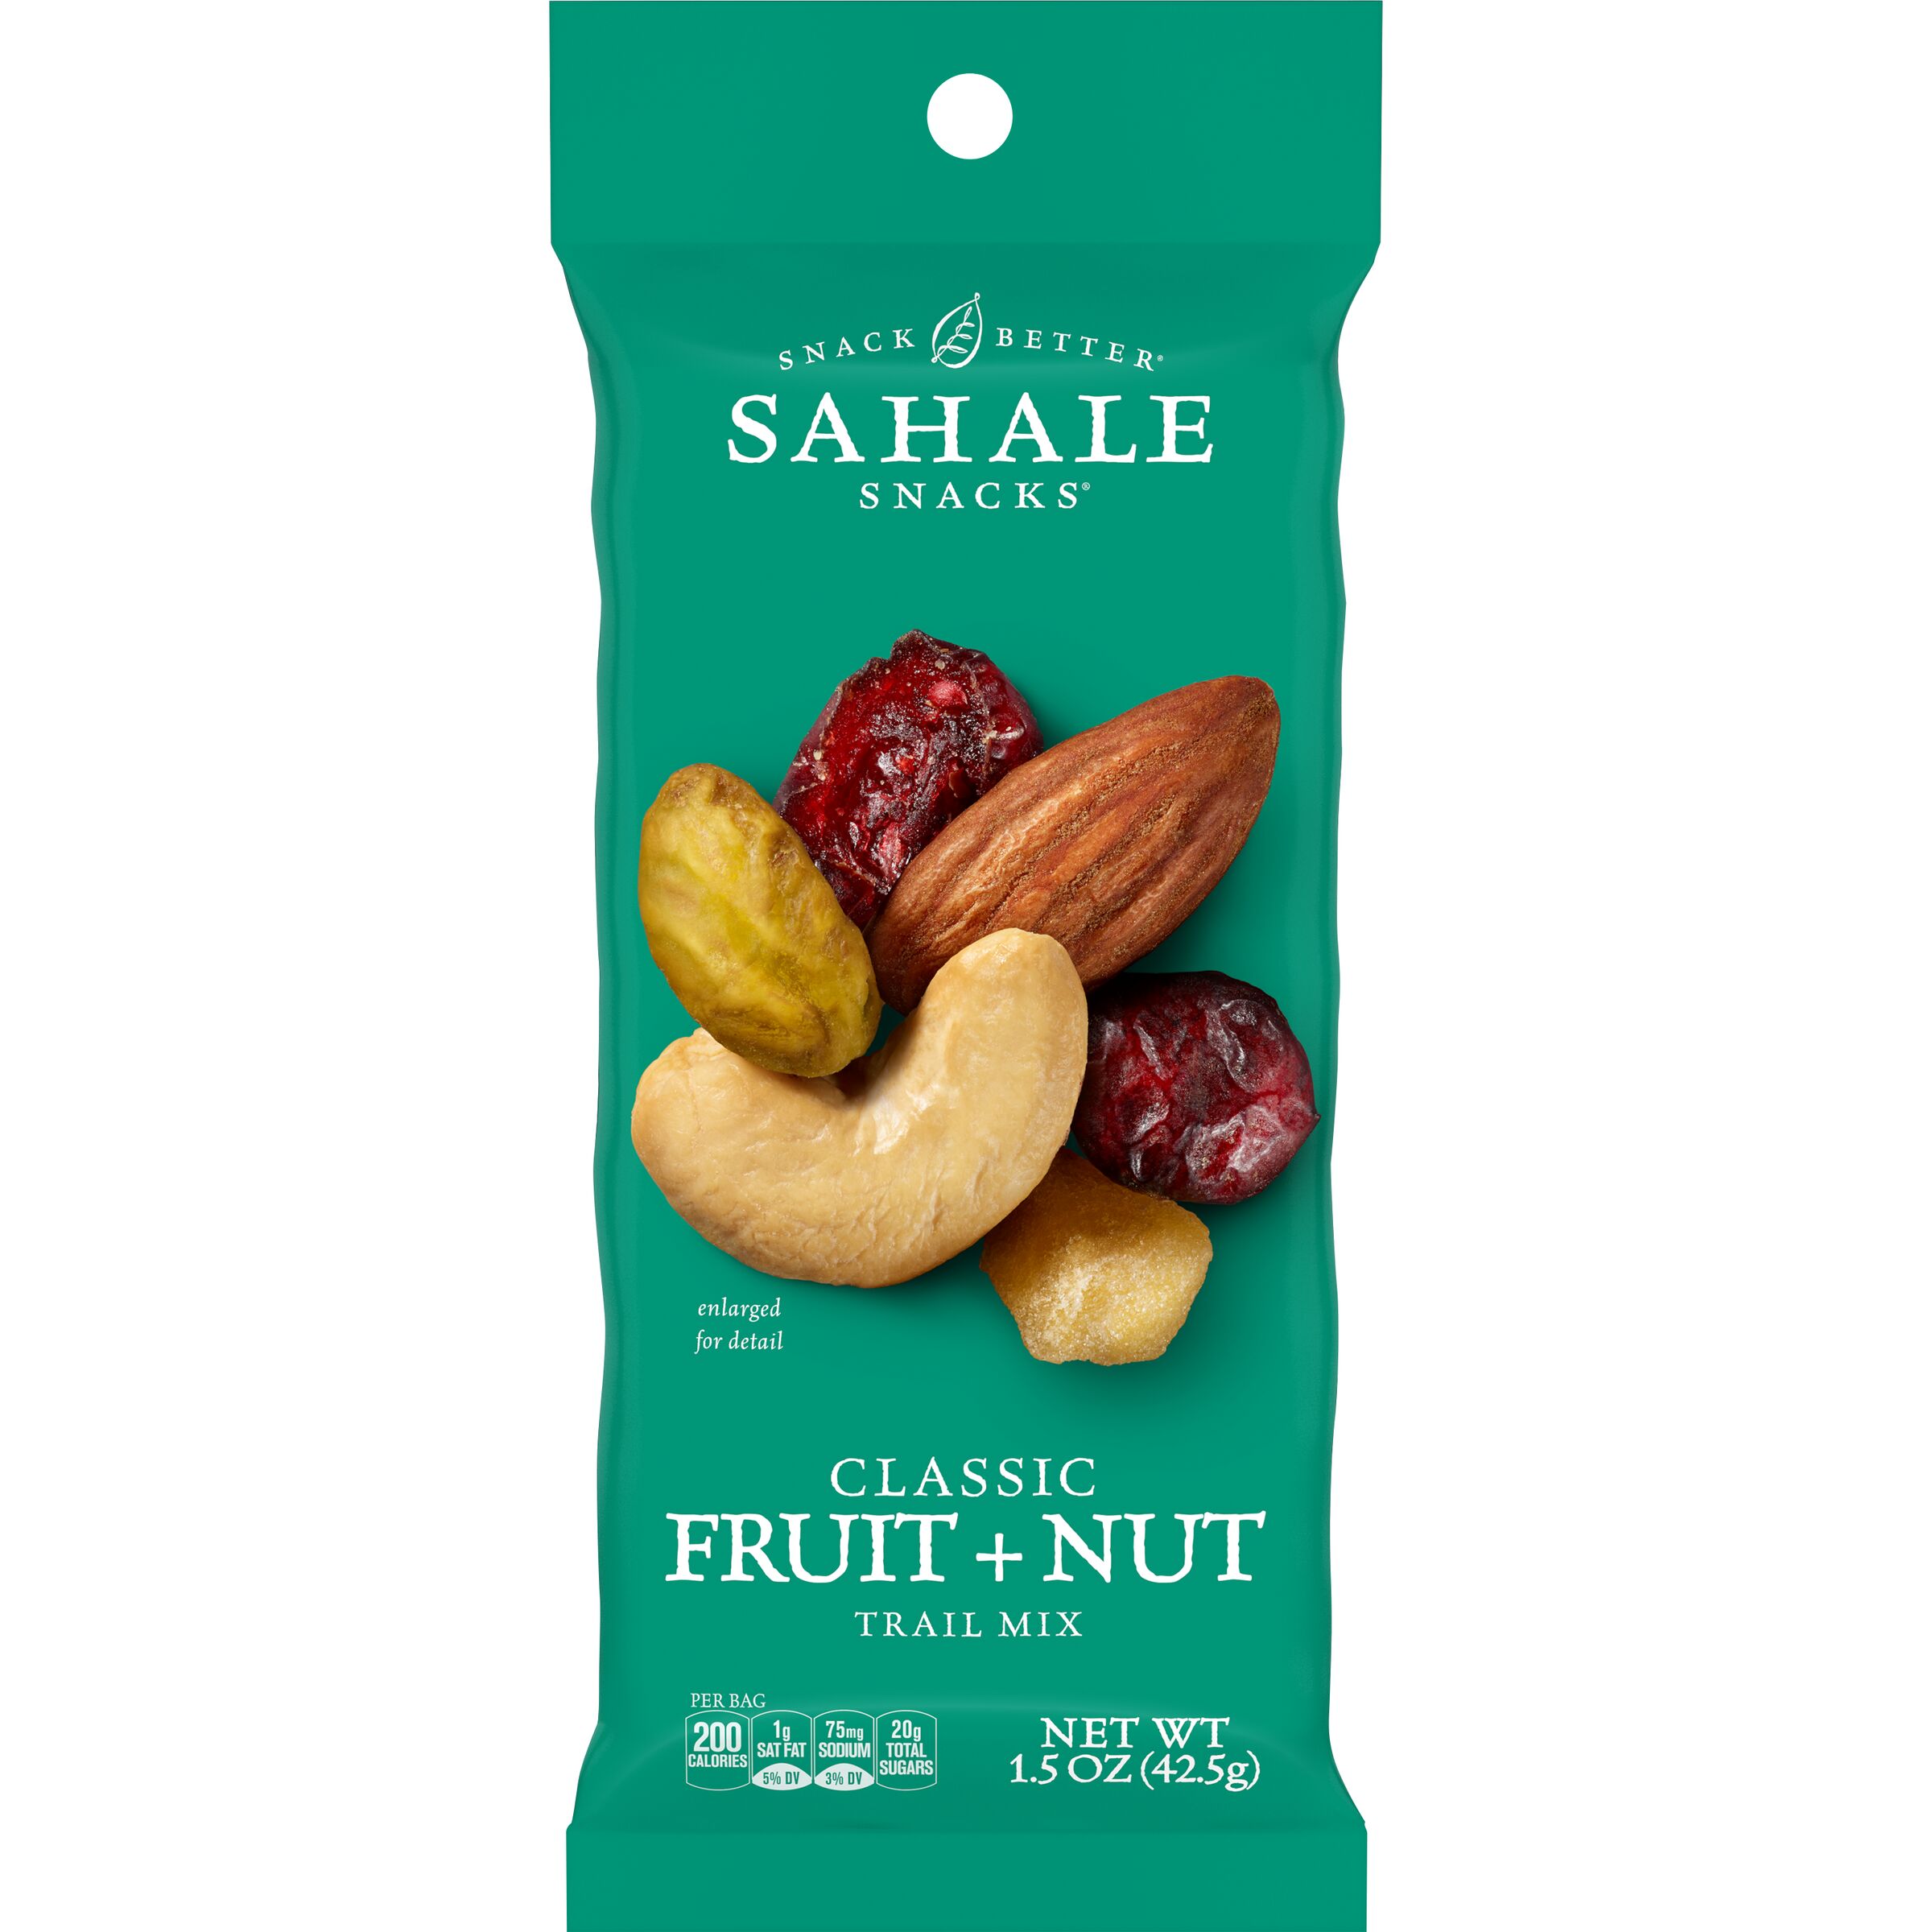 Sahale Snacks Classic Fruit and Nut Trail Mix, 1.5 Ounces (Pack of 18) - image 1 of 6